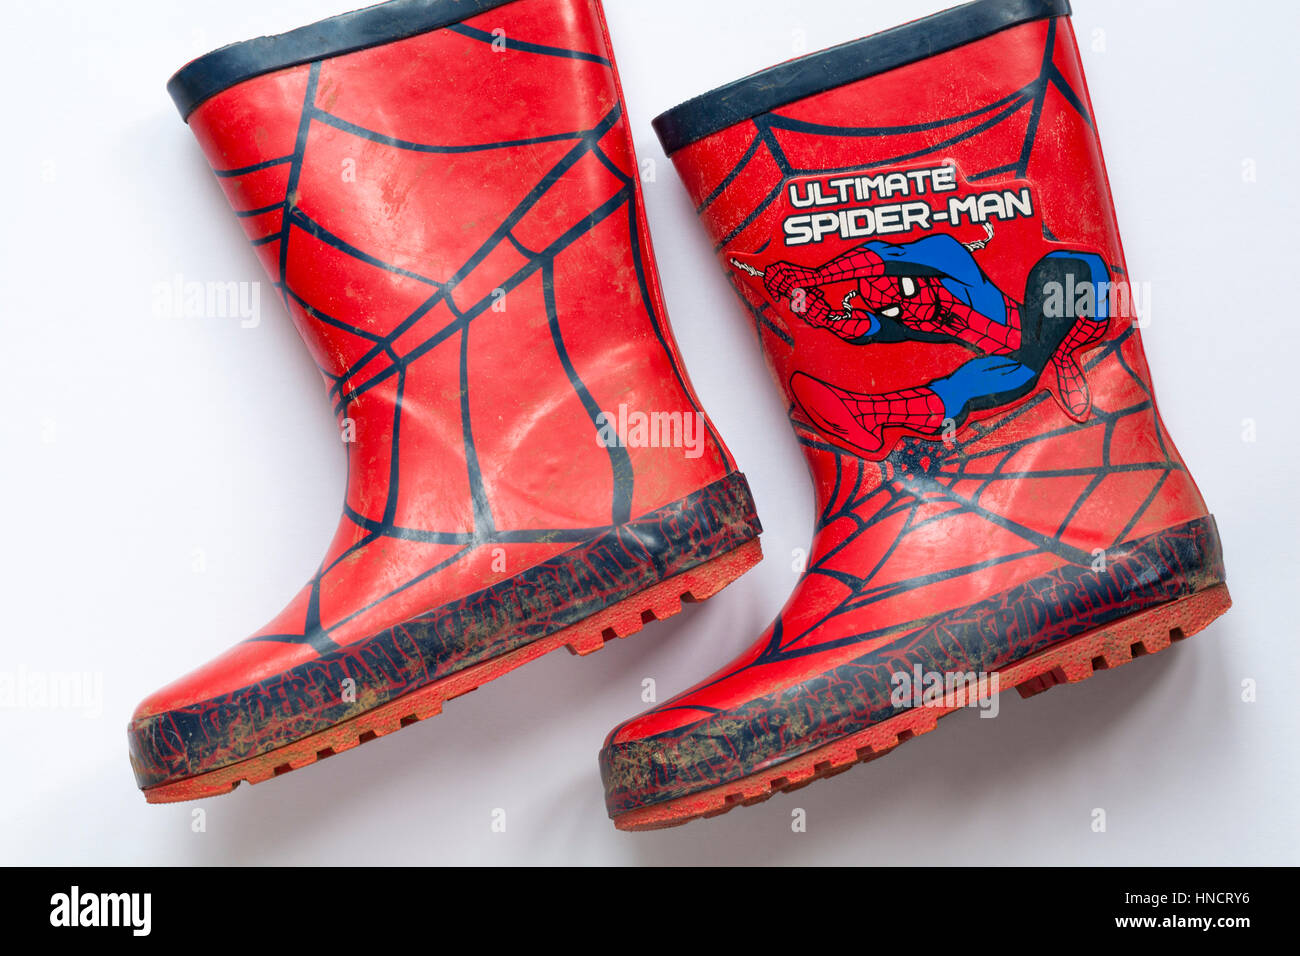 Well loved worn pair of children's wellie boots with Ultimate Spider-man on set on white background Stock Photo